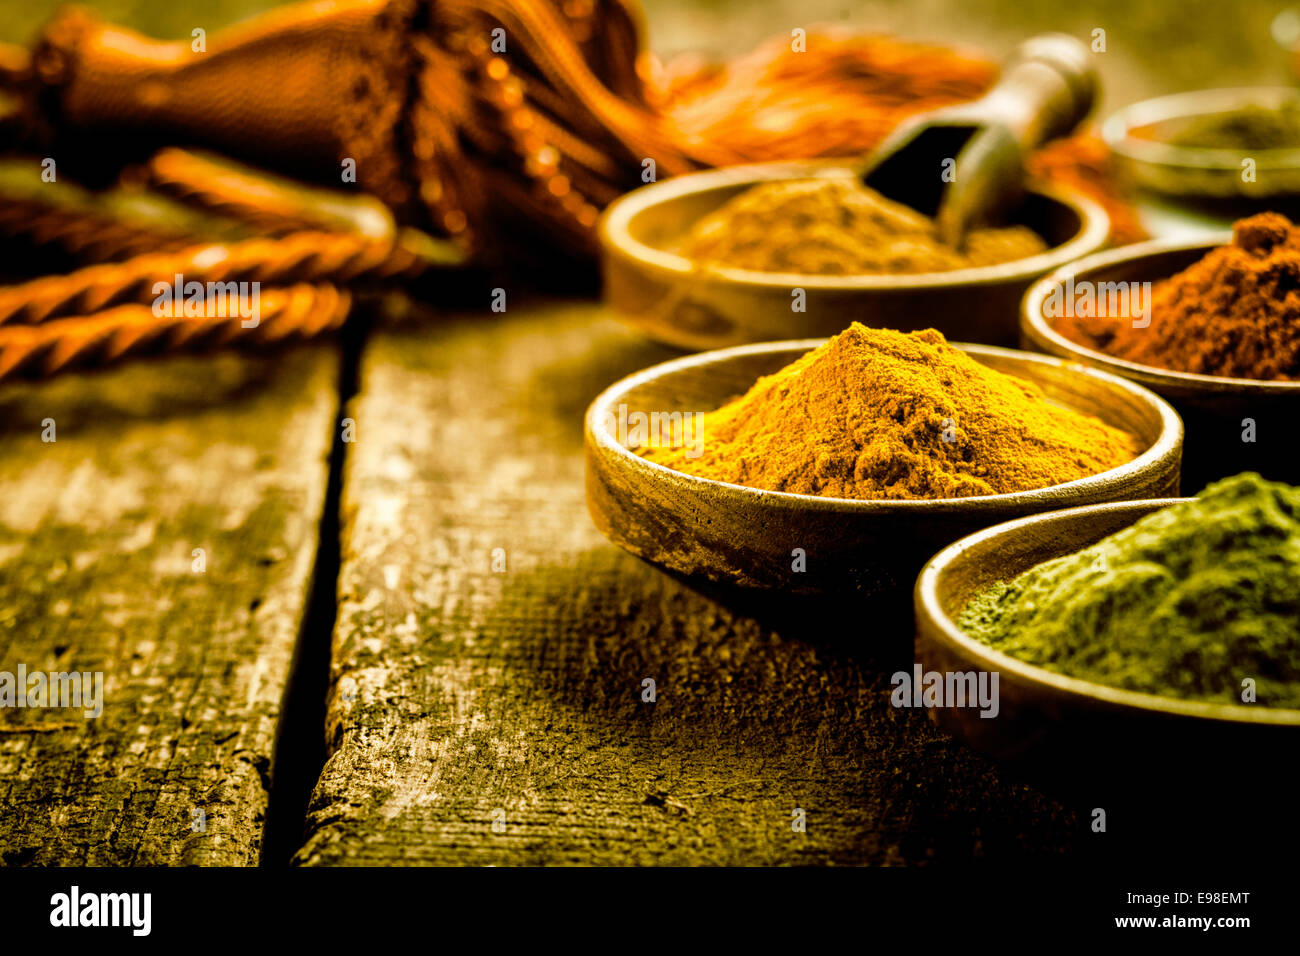 Asian cuisine with a low angle view of bowls of colourful spices with focus to a bowl of turmeric based curry powder Stock Photo